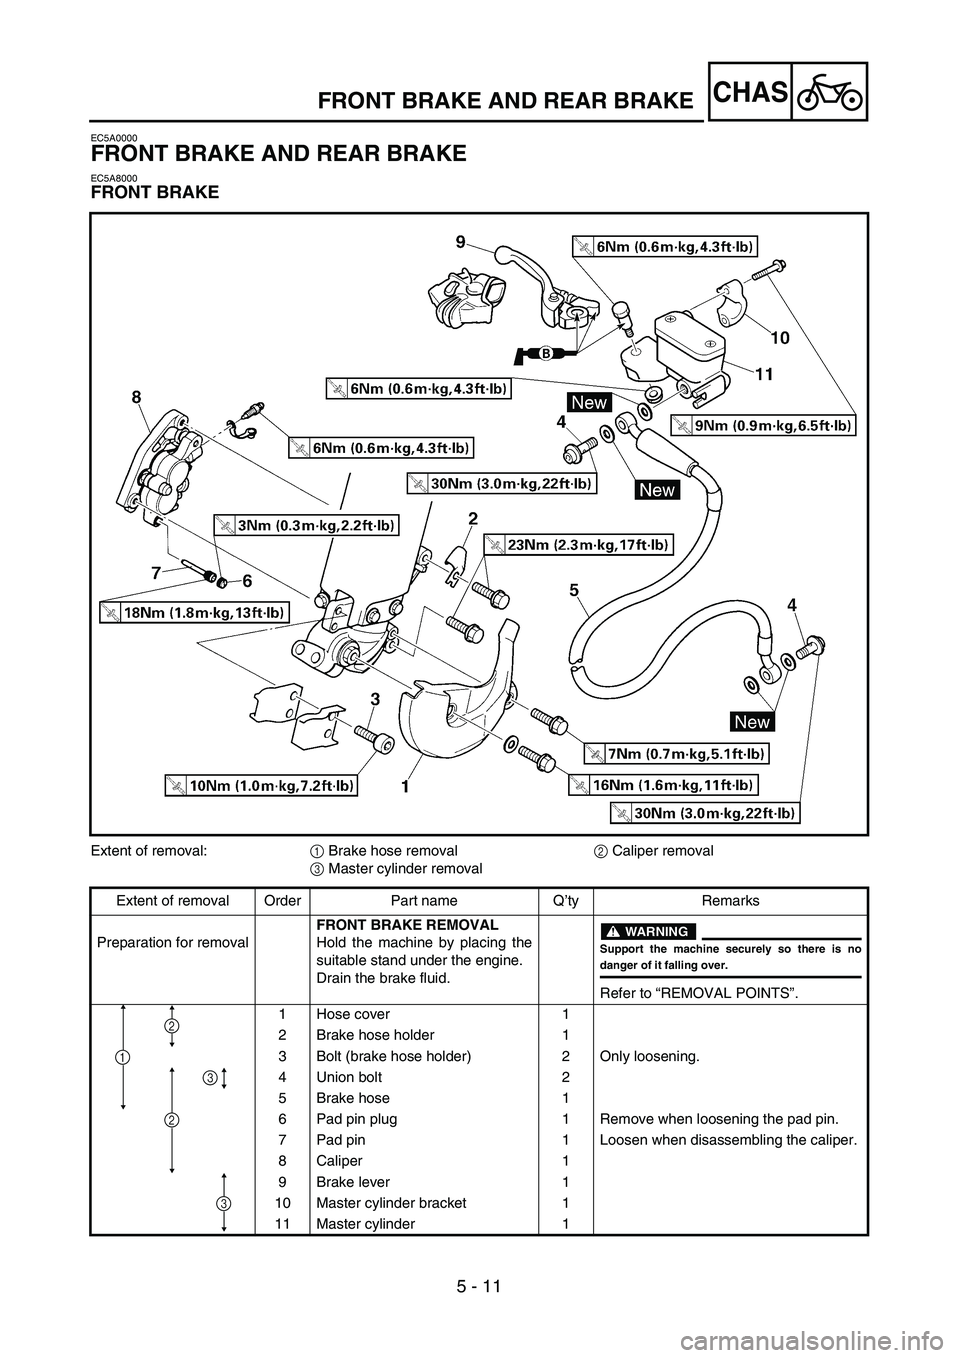 YAMAHA WR 400F 2002  Owners Manual 5 - 11
CHASFRONT BRAKE AND REAR BRAKE
EC5A0000
FRONT BRAKE AND REAR BRAKE
EC5A8000
FRONT BRAKE
Extent of removal:1 Brake hose removal2 Caliper removal
3 Master cylinder removal
Extent of removal Order